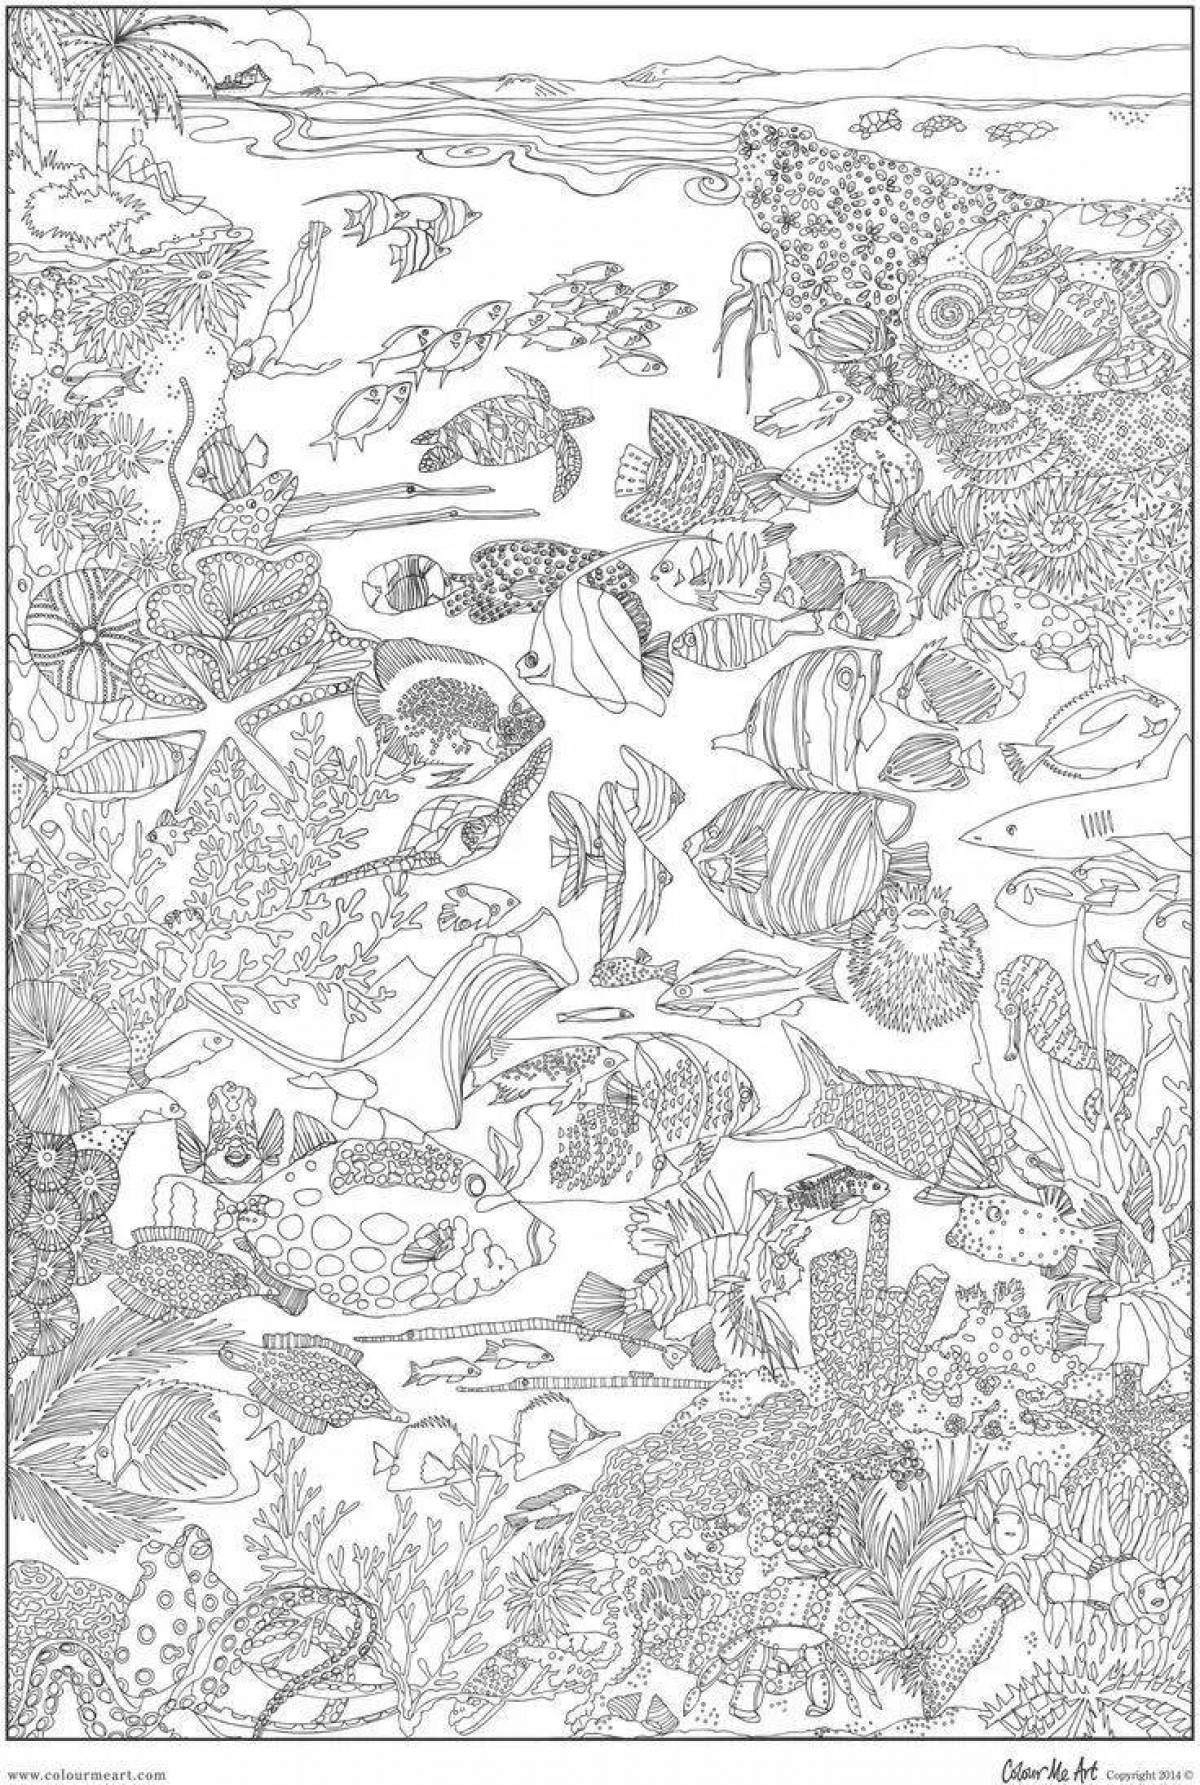 Amazing coral reef coloring page